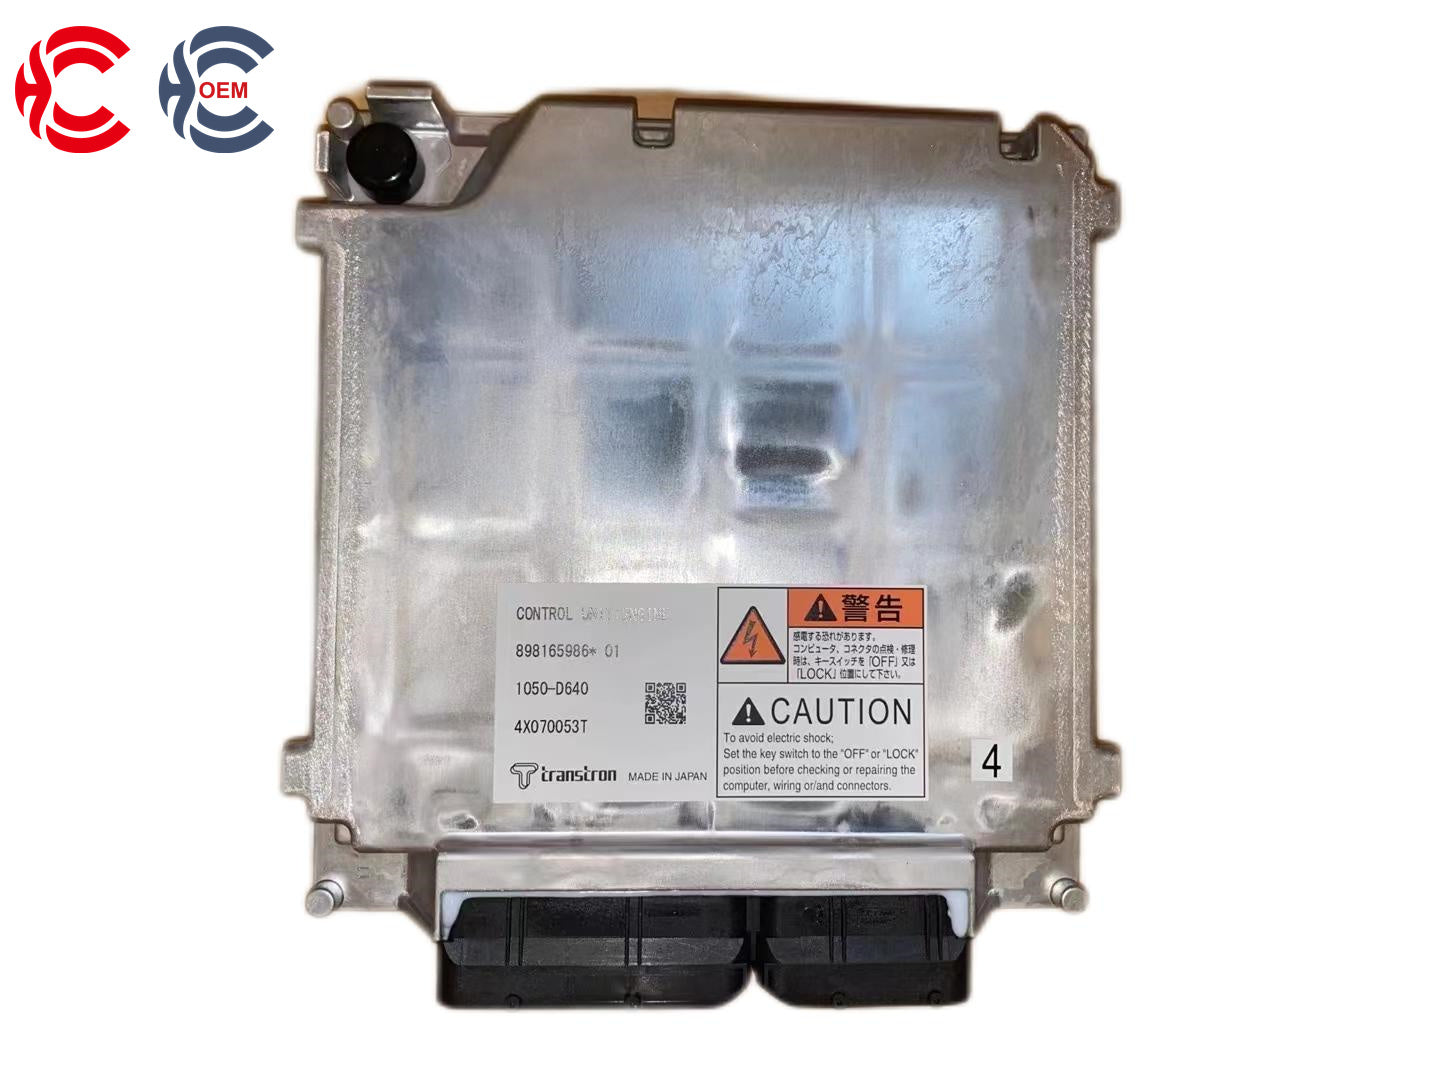 OEM: 898165986* 1050-D640 4X070053TMaterial: MetalColor: SilverOrigin: Made in ChinaWeight: 1500gPacking List: 1* ECU Diesel Engine More ServiceWe can provide OEM Manufacturing serviceWe can Be your one-step solution for Auto PartsWe can provide technical scheme for you Feel Free to Contact Us, We will get back to you as soon as possible.